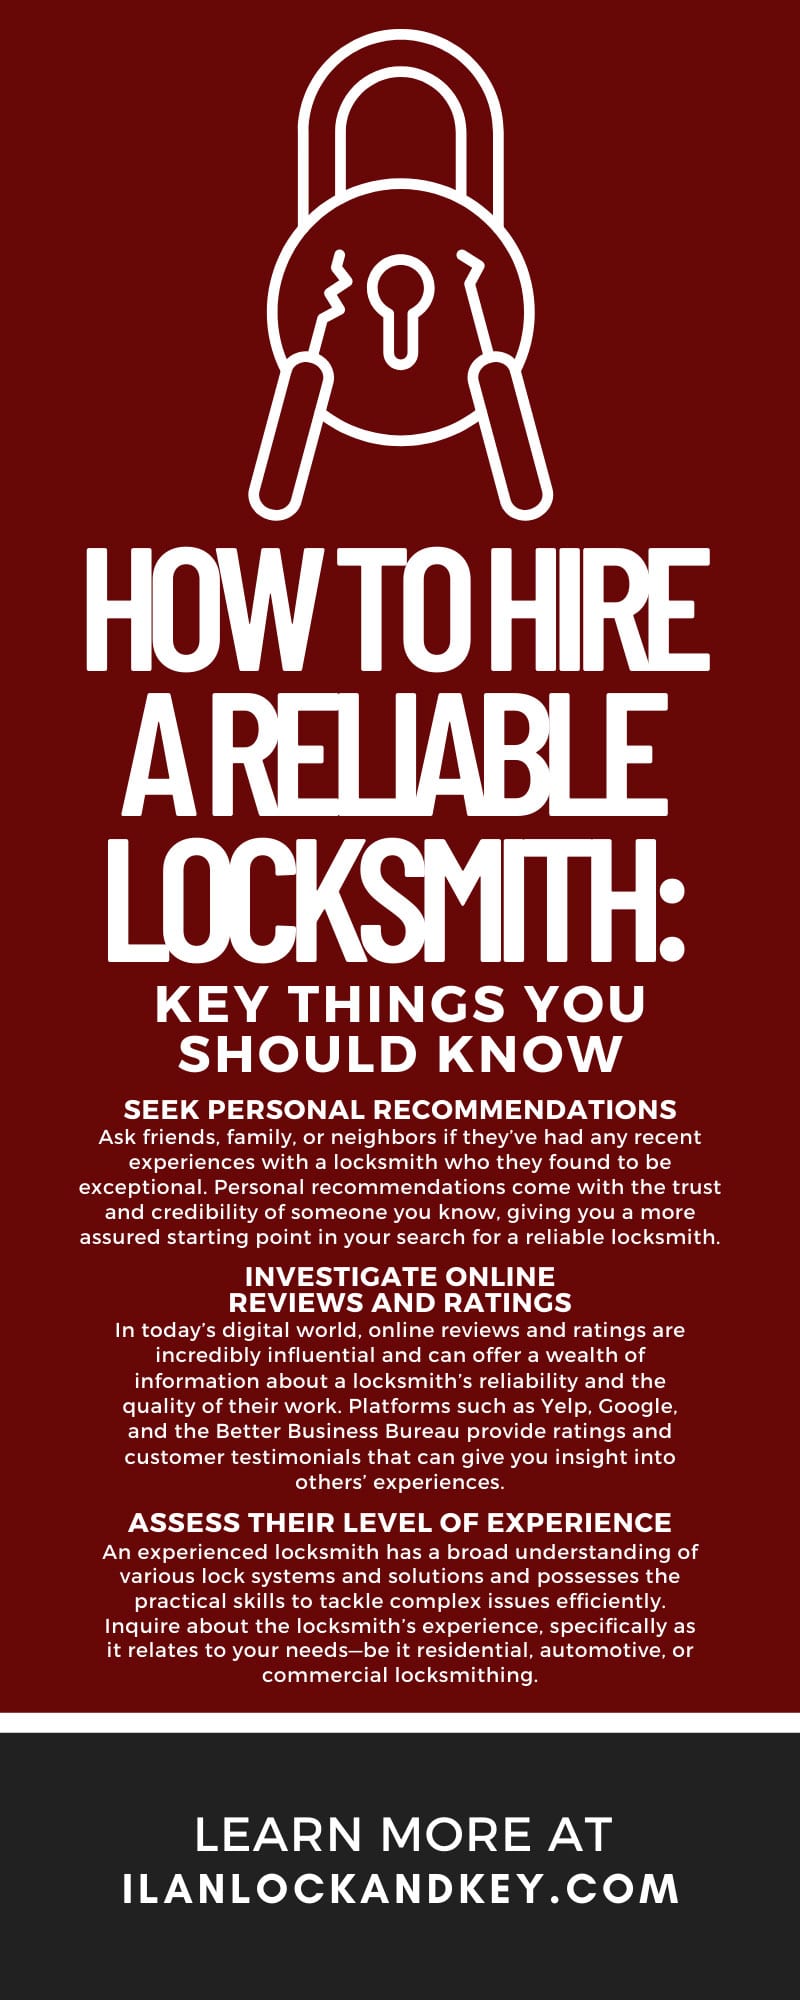 How To Hire a Reliable Locksmith: Key Things You Should Know